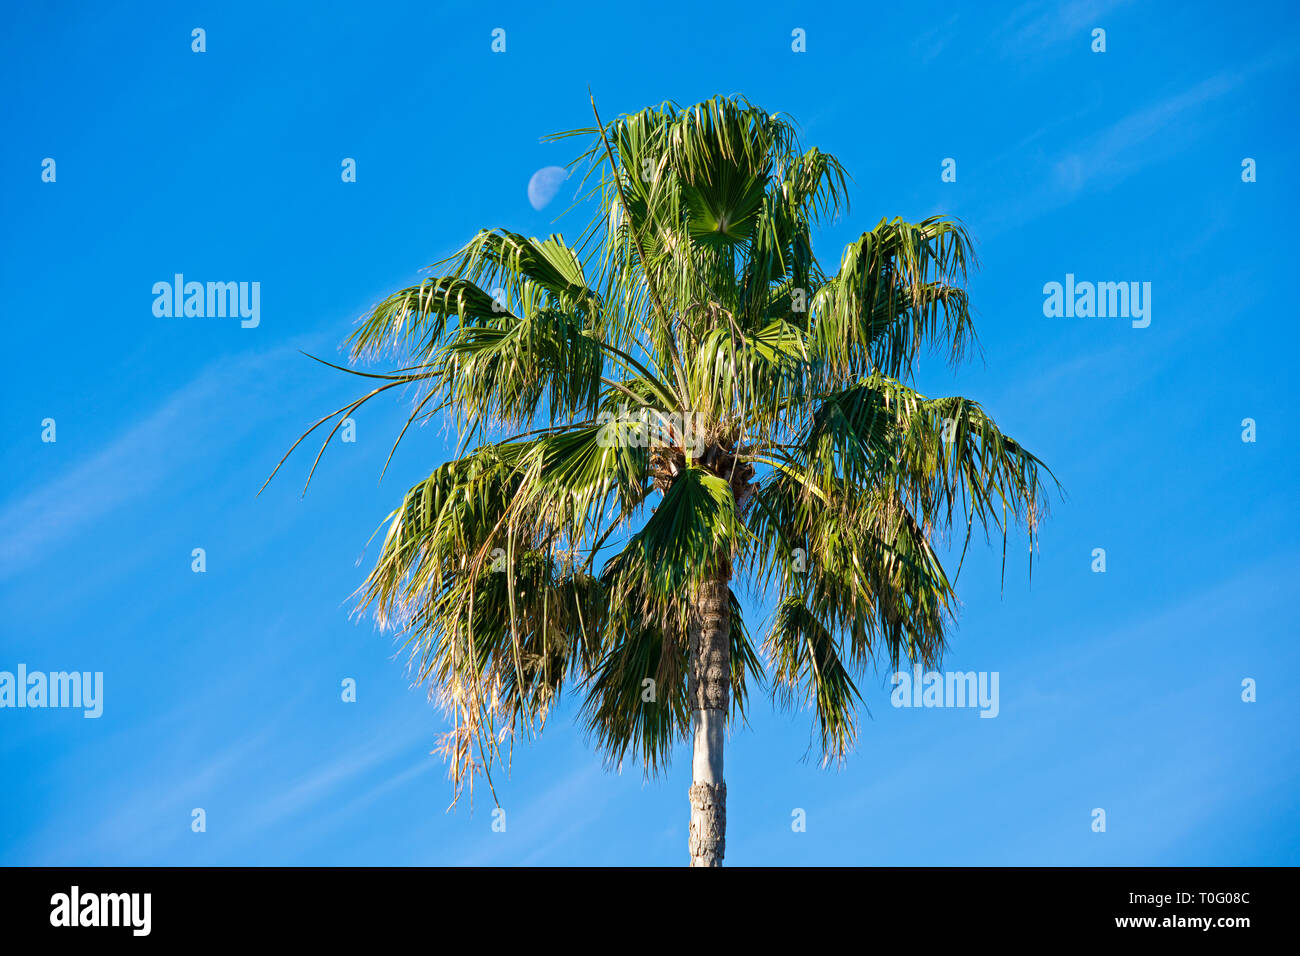 tropical palm tree with moon in blue daytime sky Stock Photo